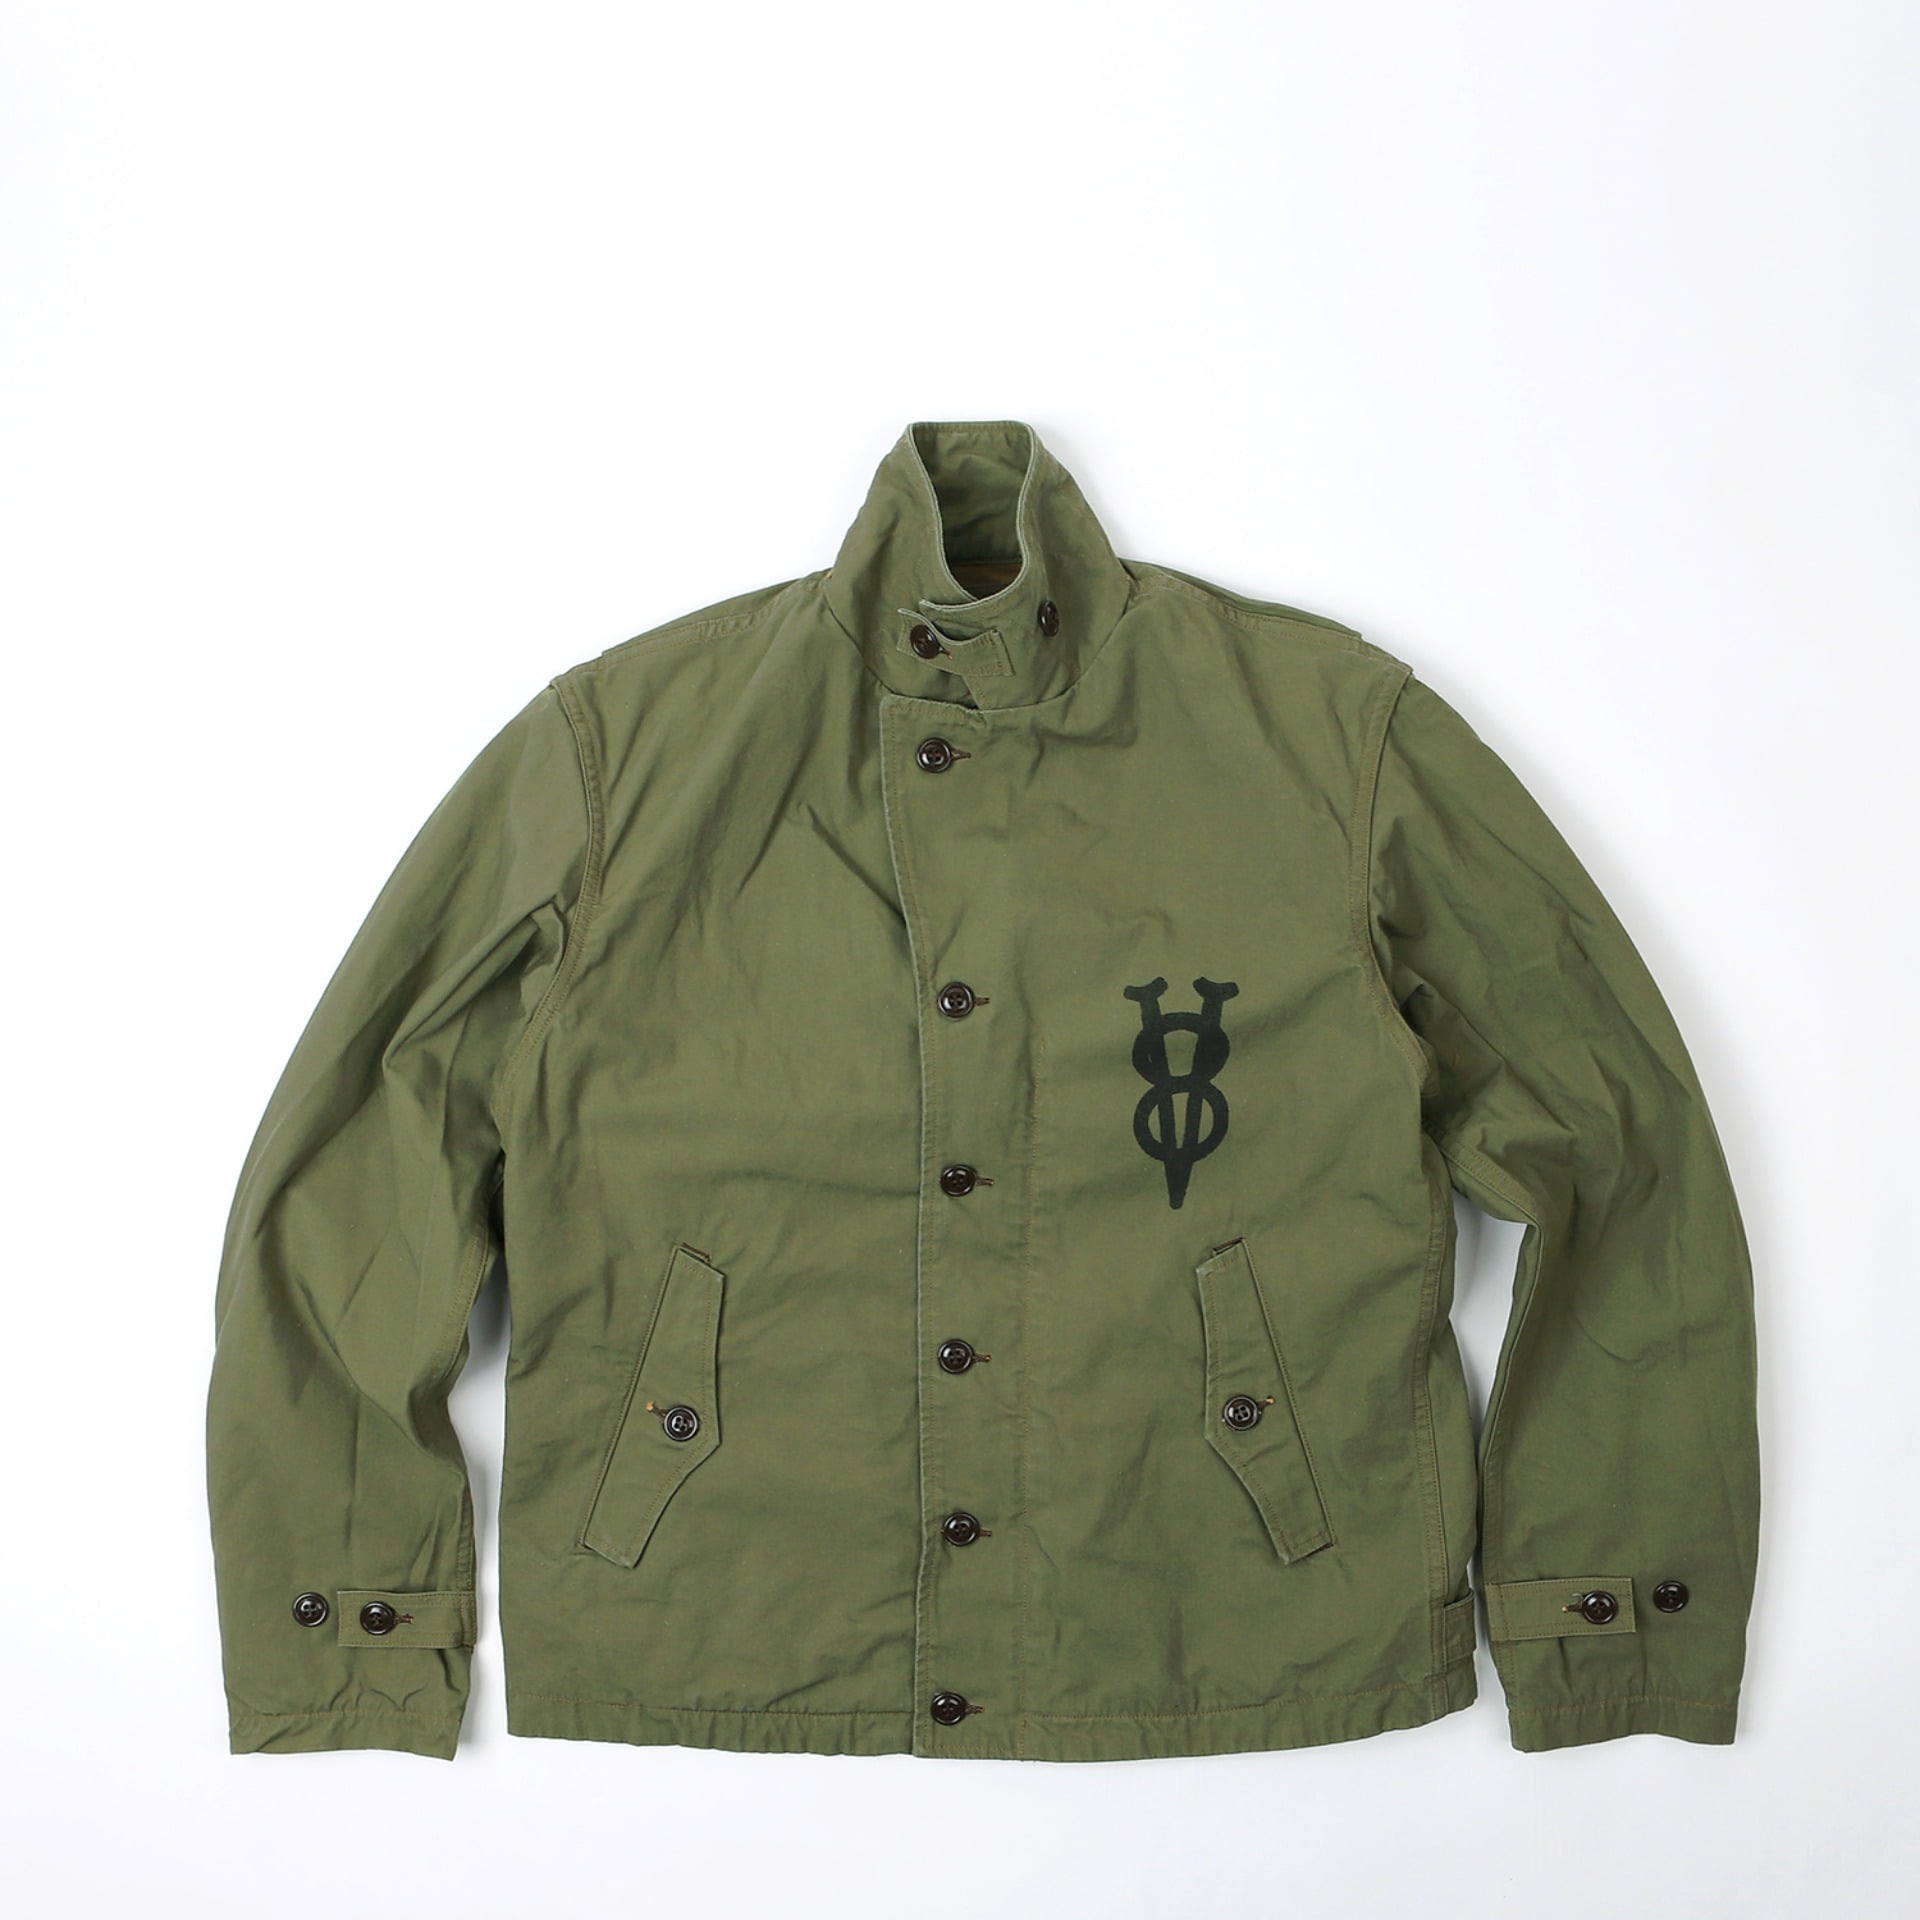 [UNION SPECIAL OVERALLS]Civilian Military jacket M-1938 FIELD JACKET&quot;V8 150 MPH CLUB&quot; (Olive)